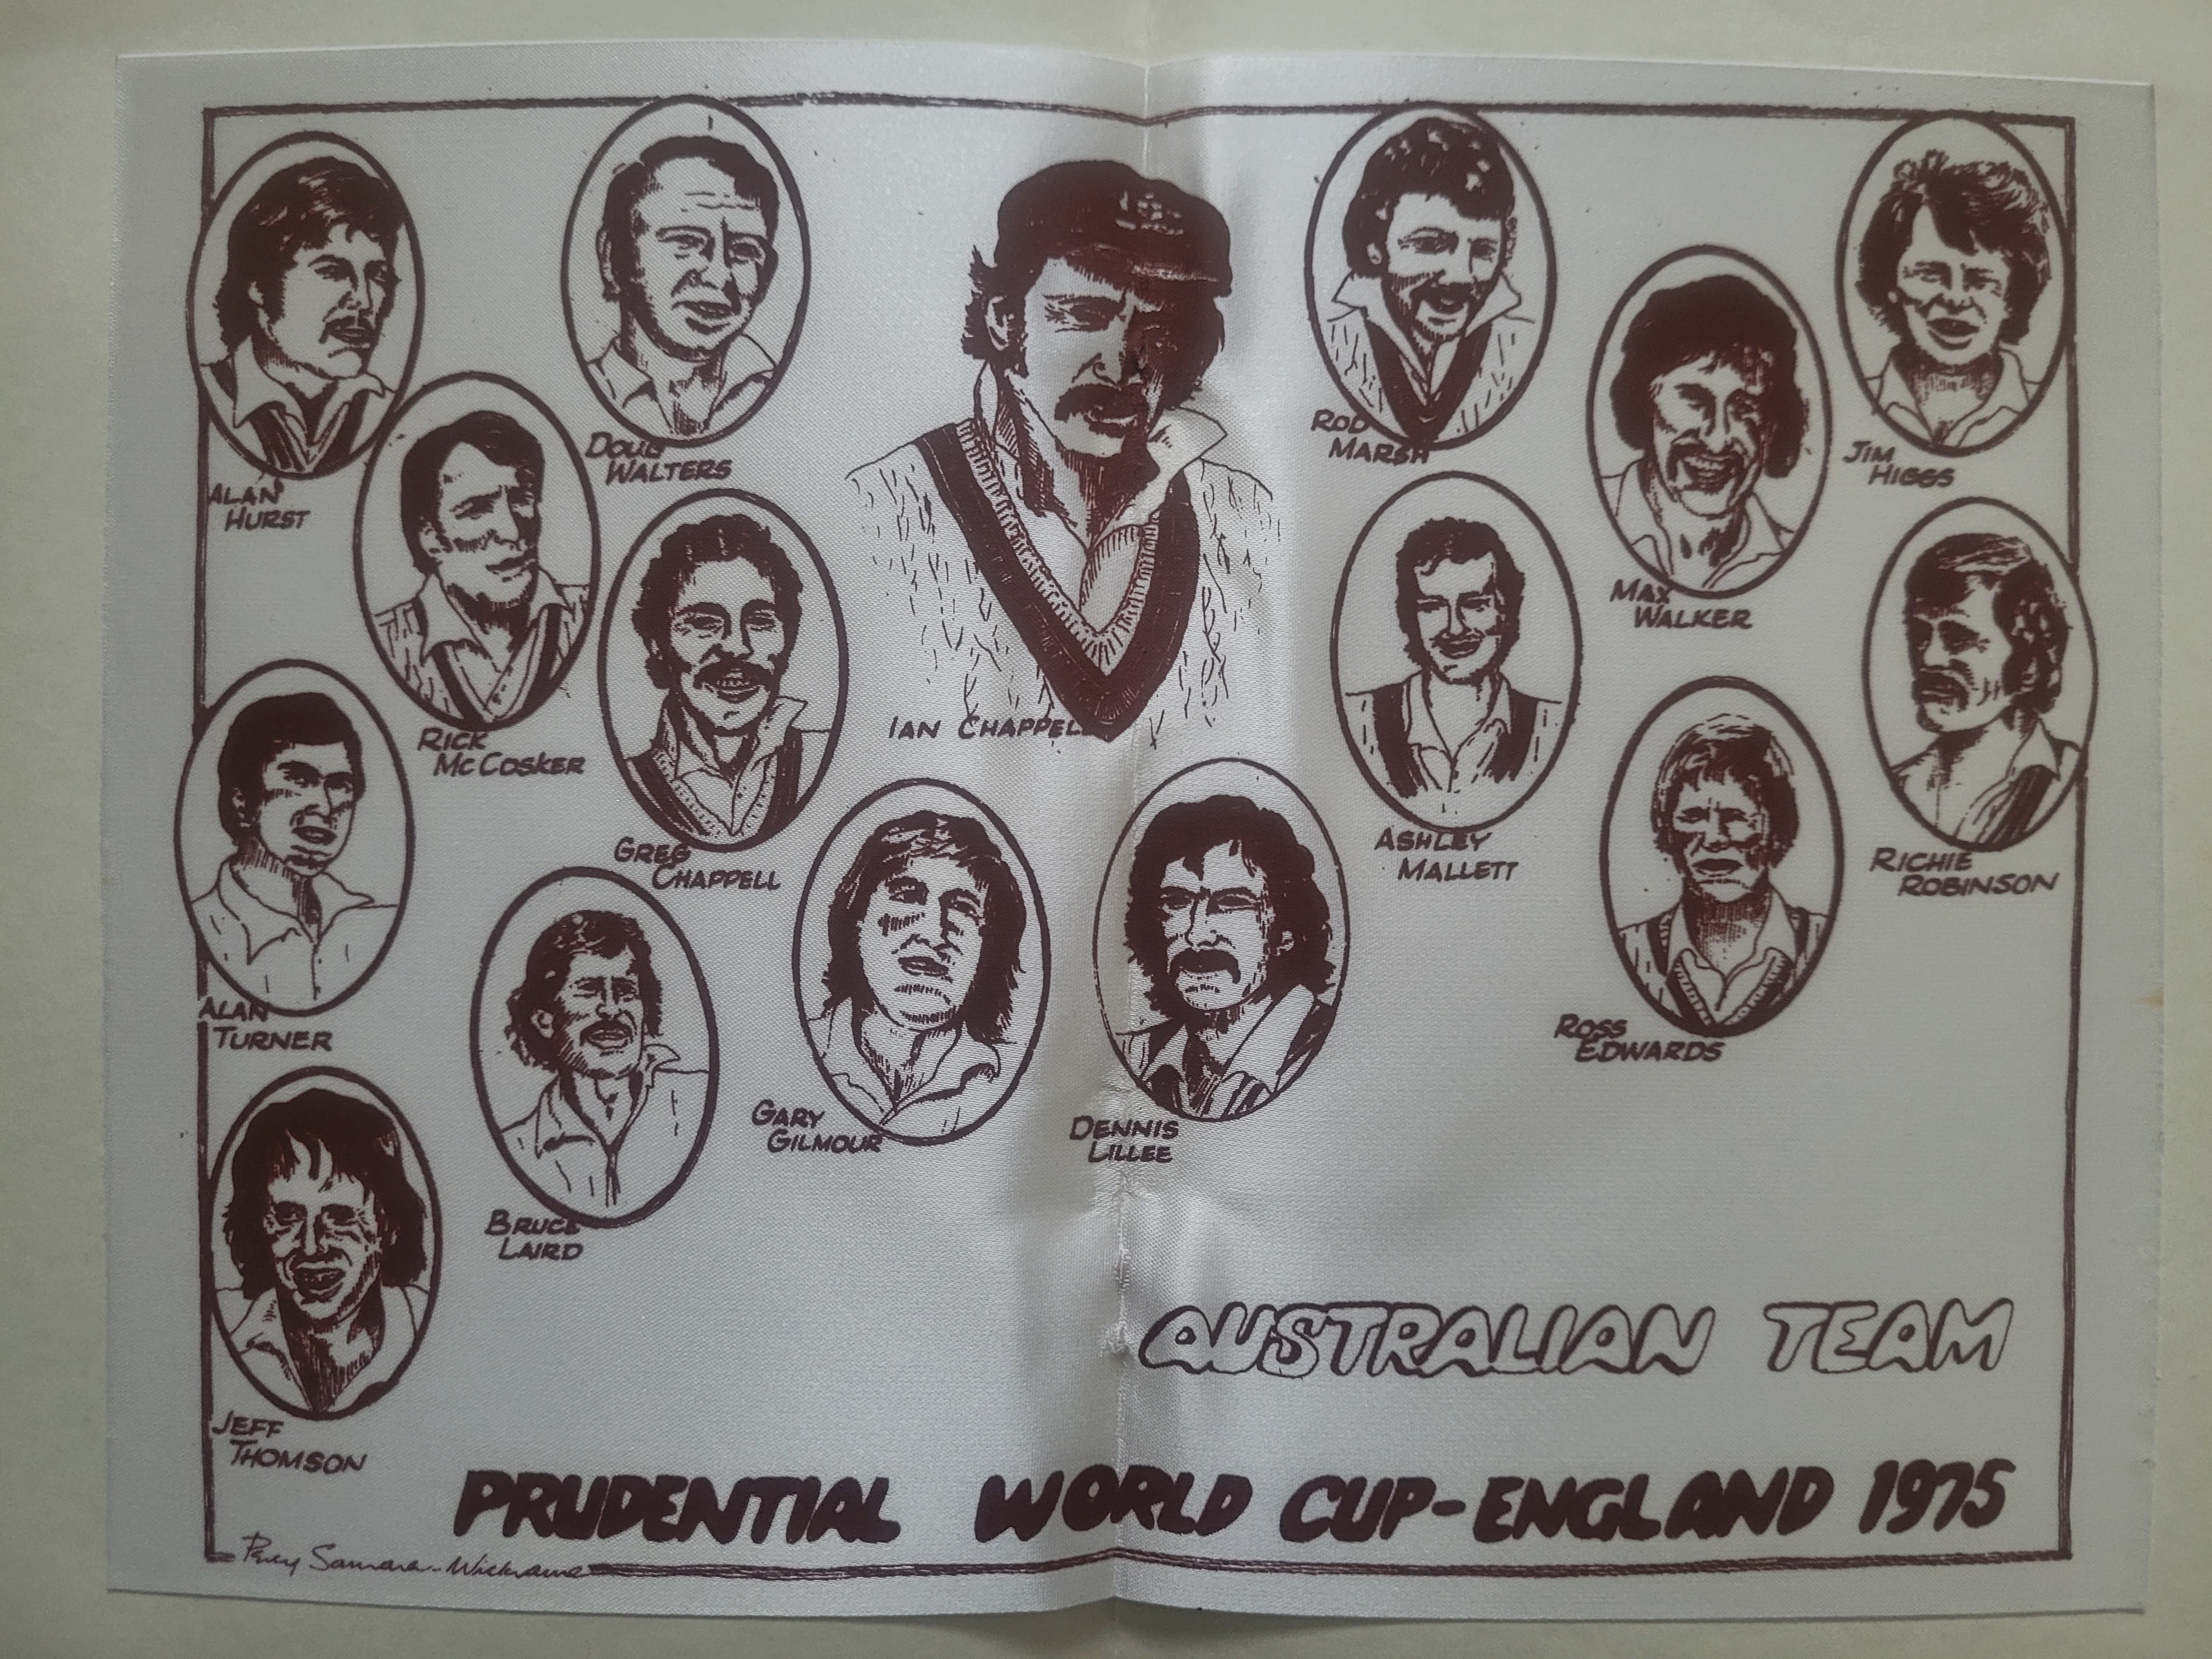 CRICKET - AUSTRALIA 1975 WORLD CUP BOOKLET INCLUDES THE ORIGINAL SILK PRINT - Image 2 of 2